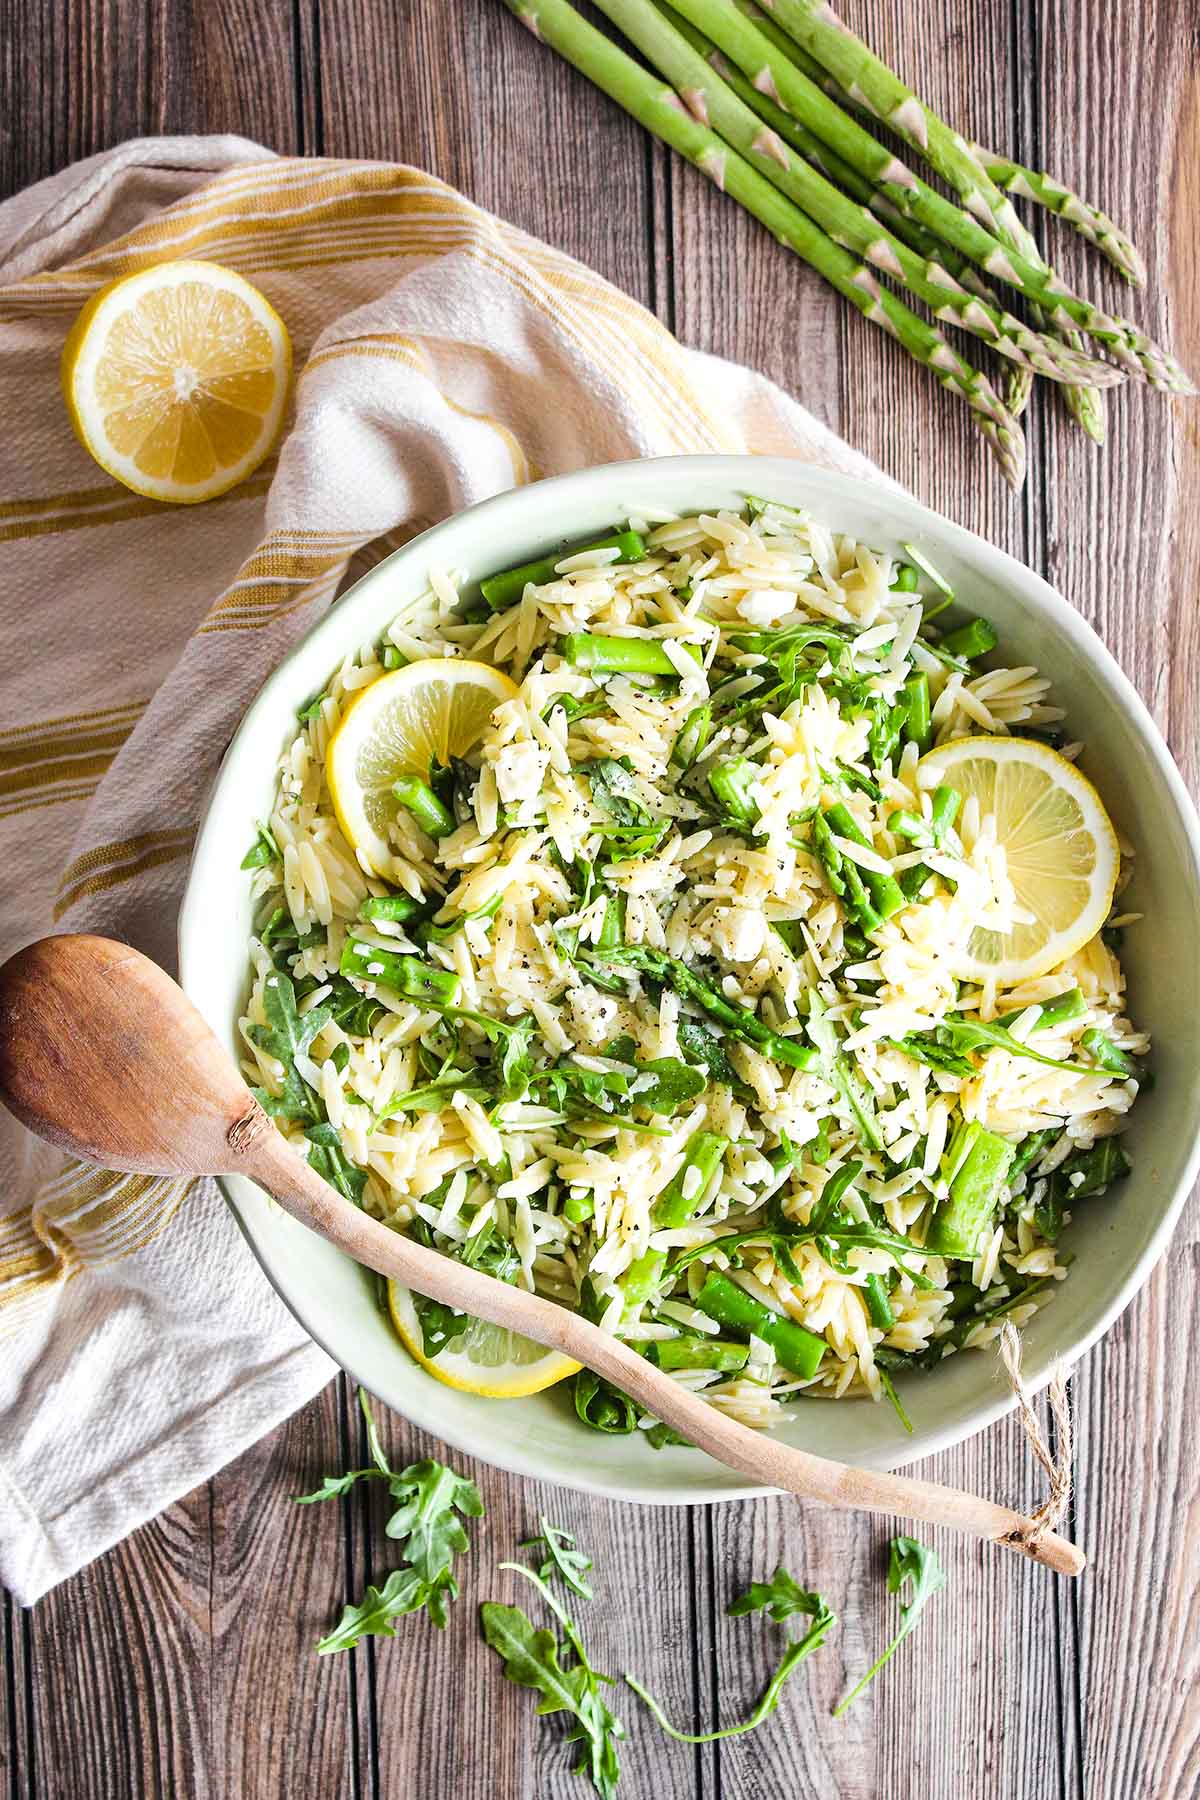 Bowl of orzo salad atop a kitchen towel with asparagus, lemon halves, and scattered arugula.